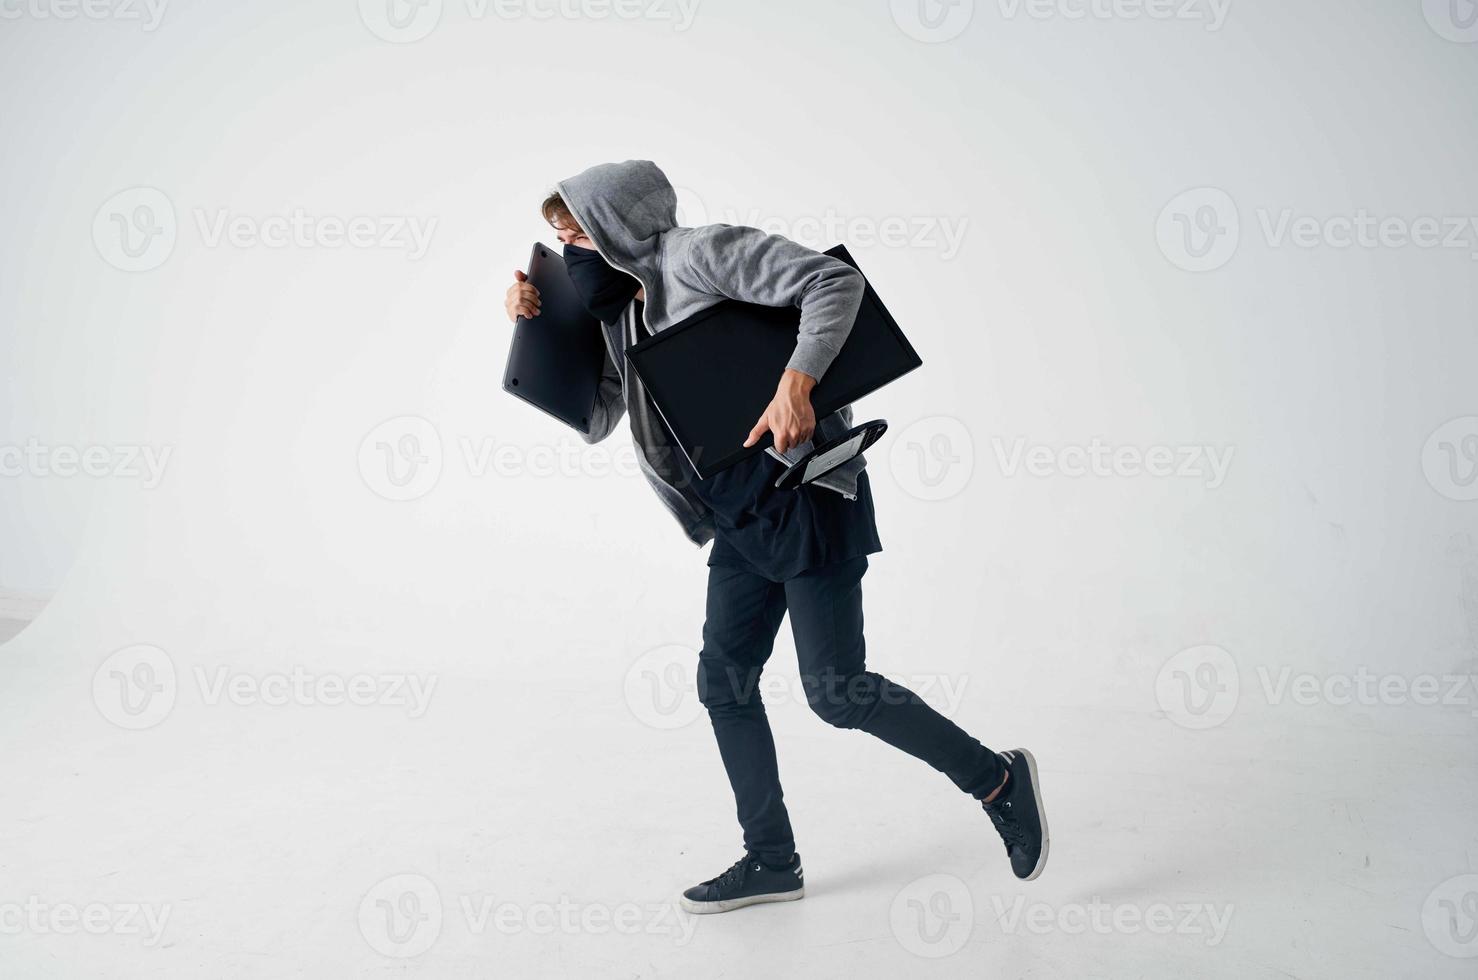 hacker stealth technique robbery safety hooligan Lifestyle photo